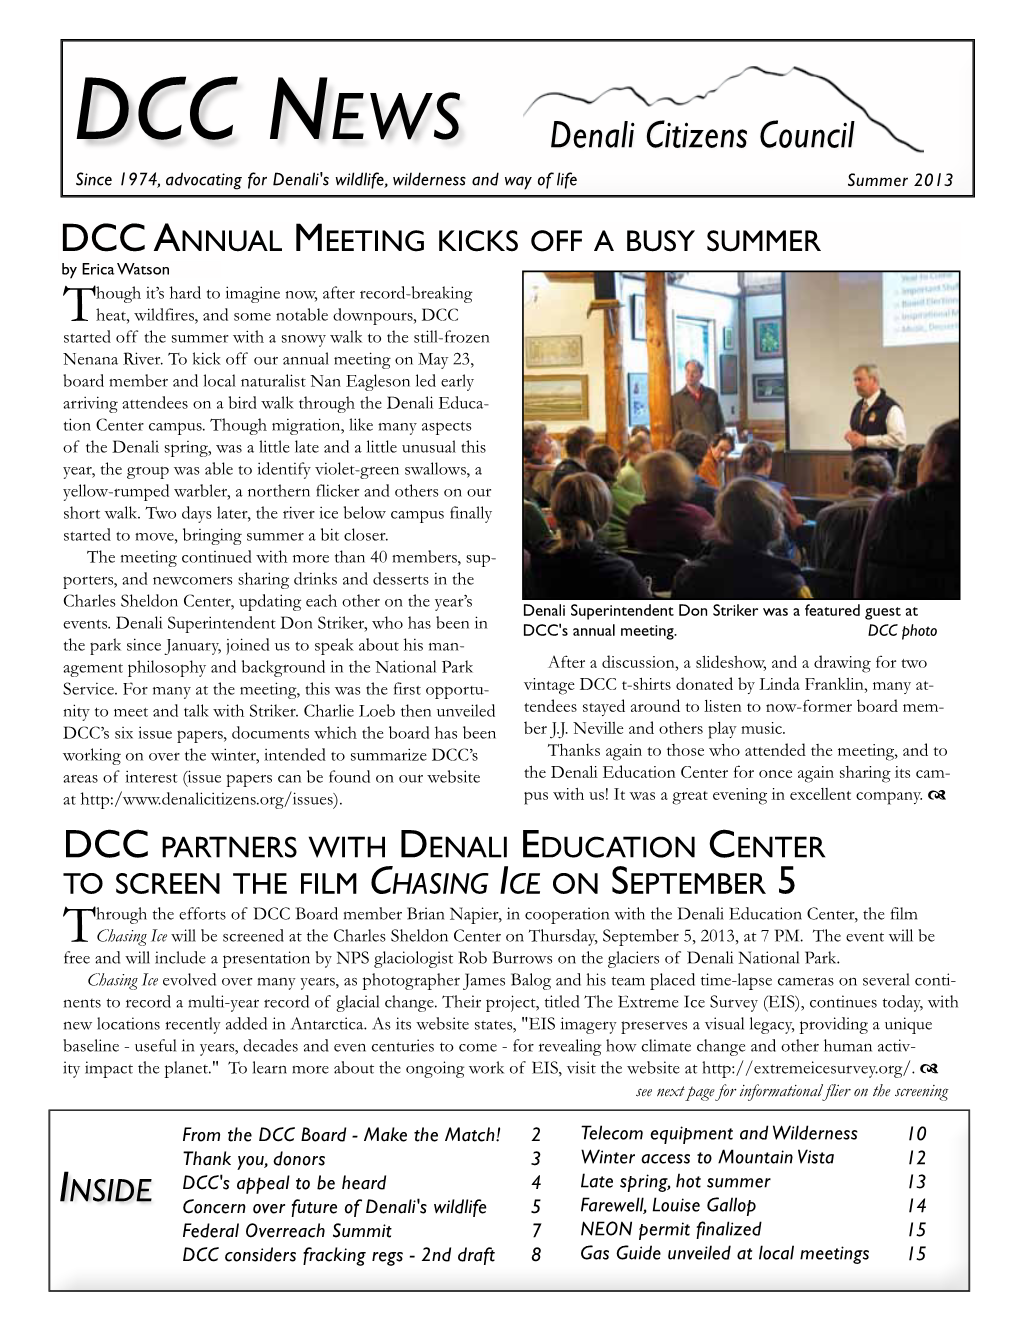 DCC News Denali Citizens Council Since 1974, Advocating for Denali's Wildlife, Wilderness and Way of Life Summer 2013